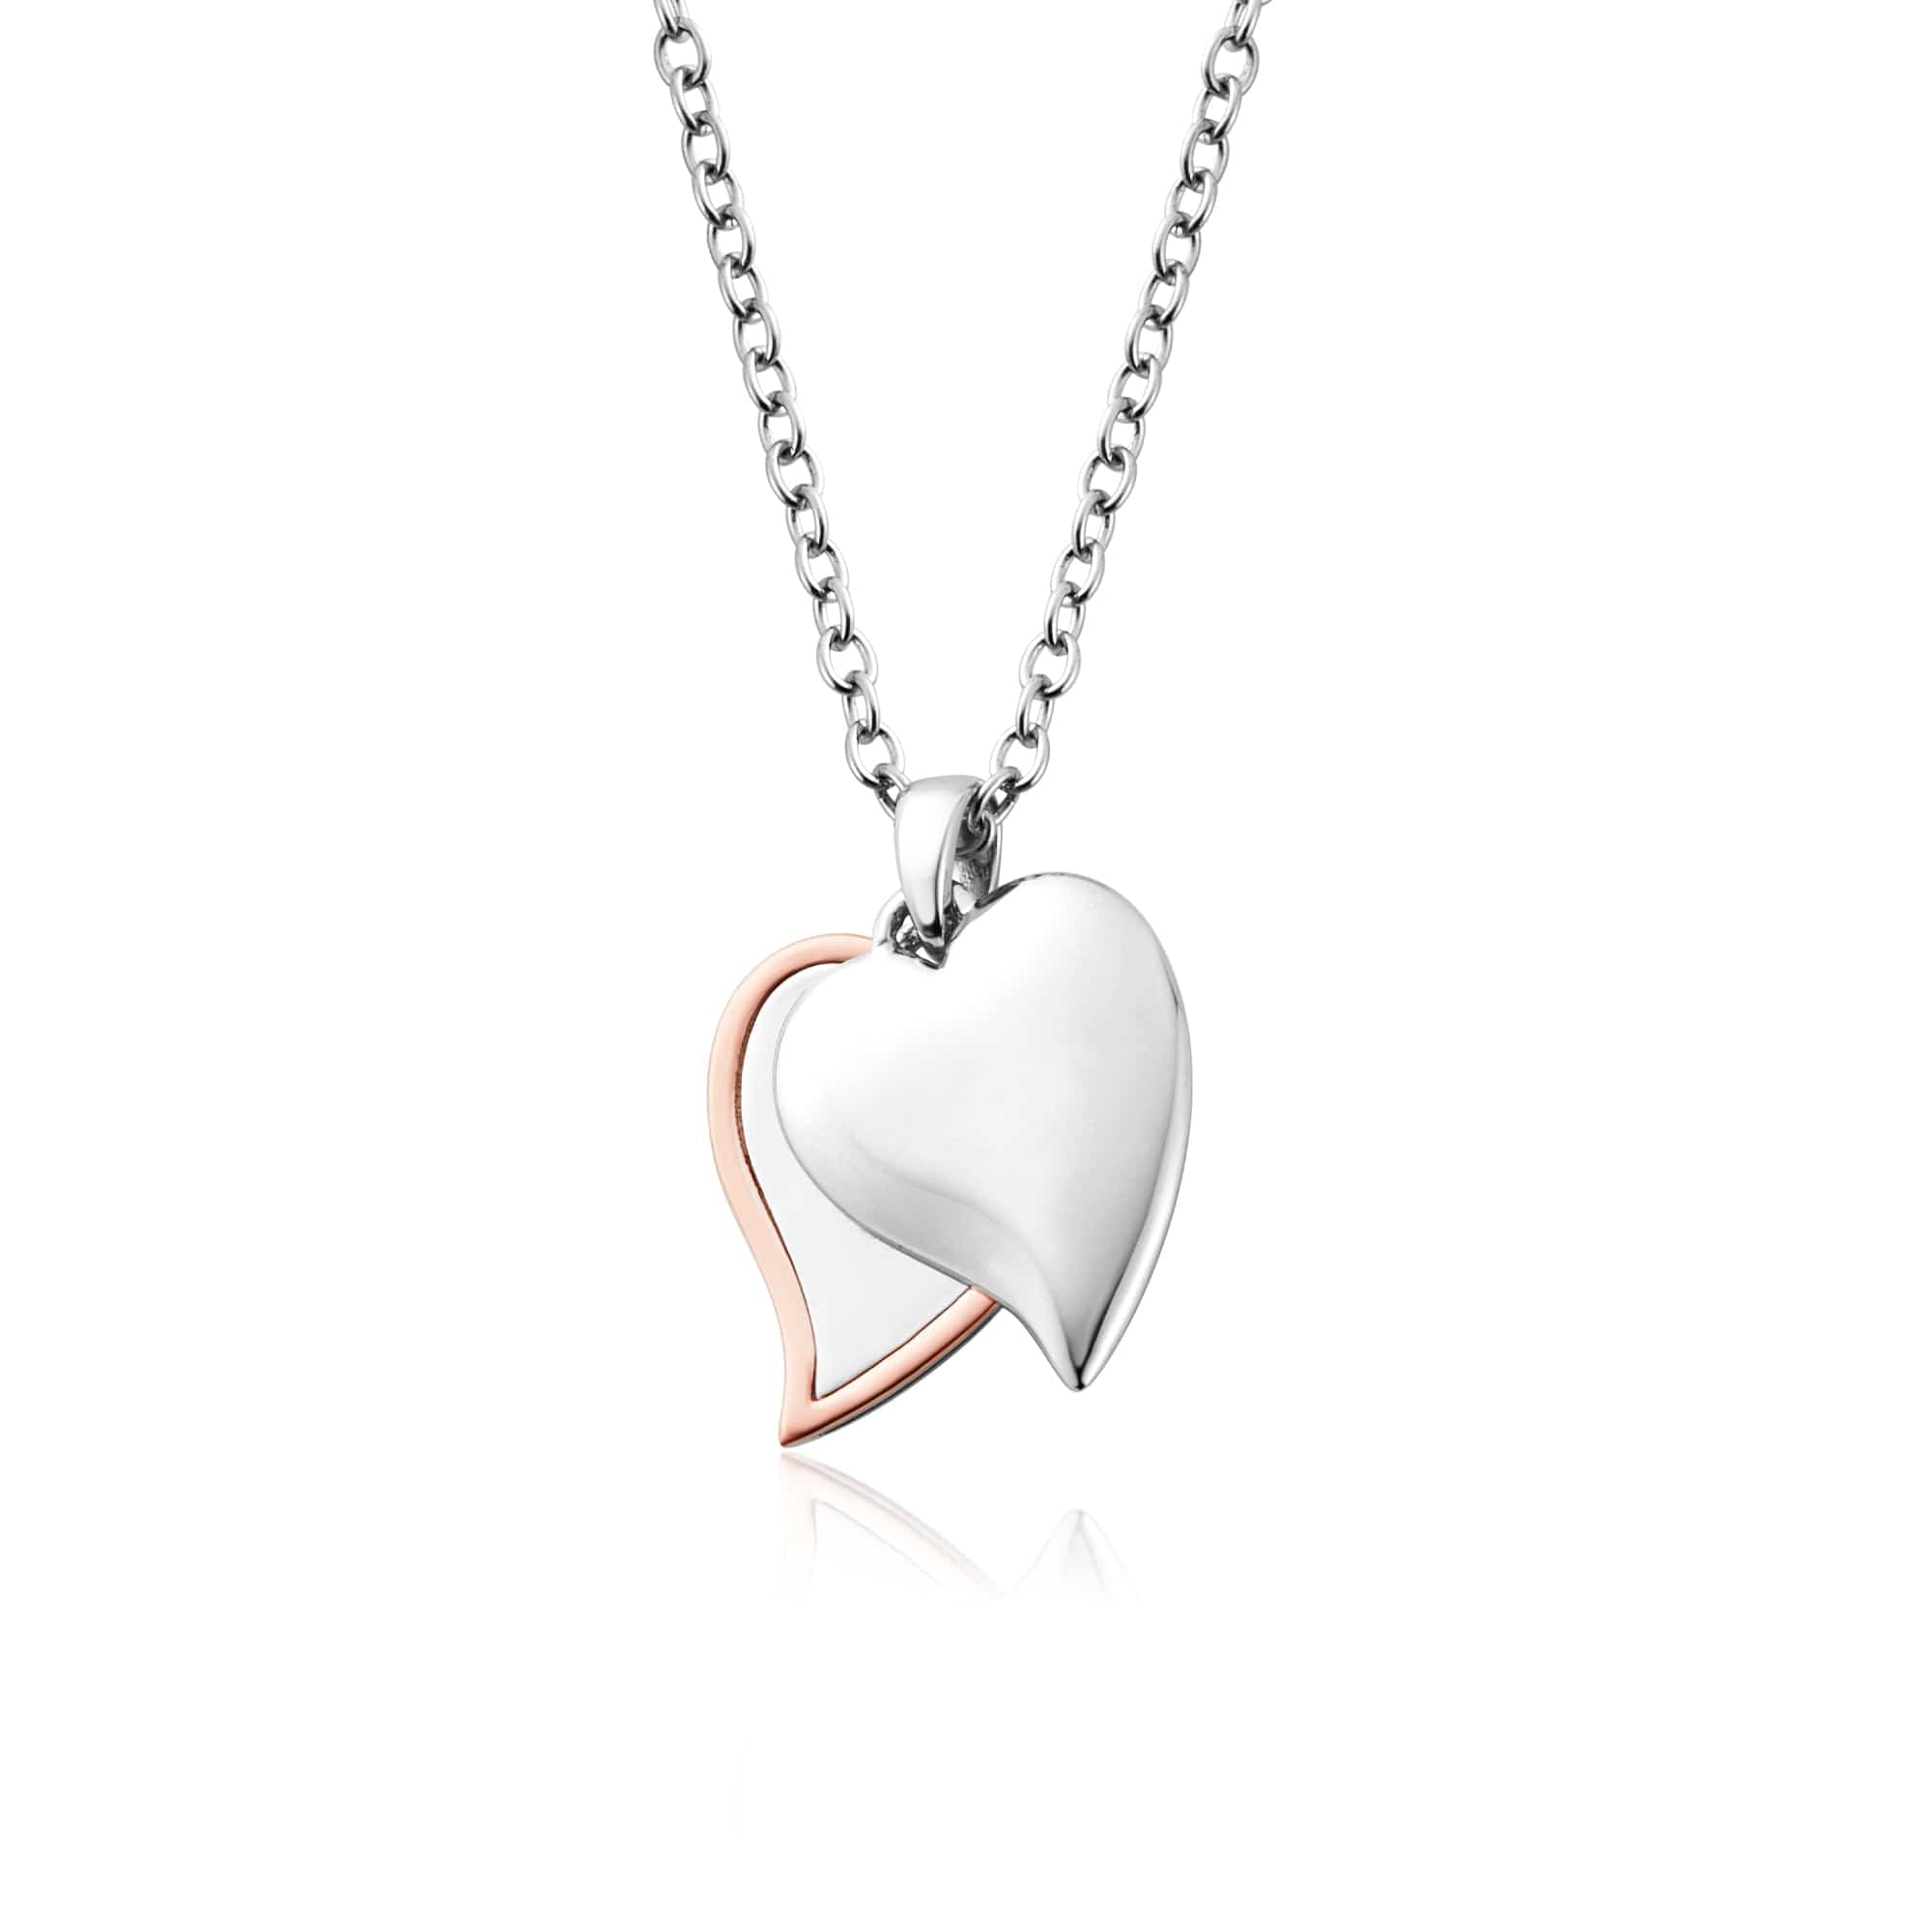 Clogau Womens Silver And 9ct Rose Gold Cariad Mini Heart Pendant And Chain  | eBay